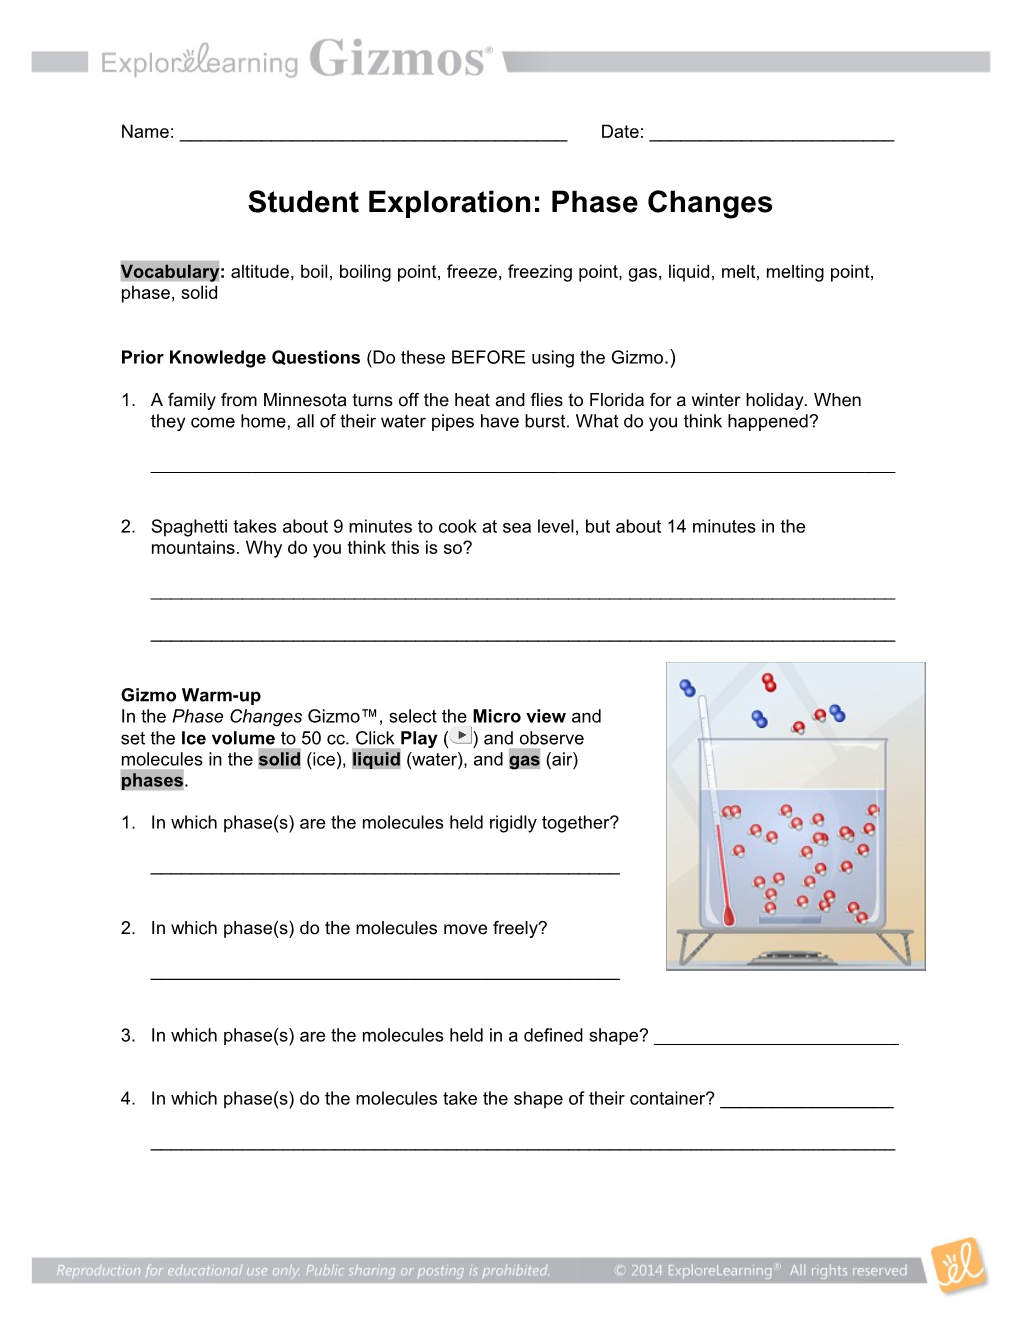 Student Exploration: Phase Changes